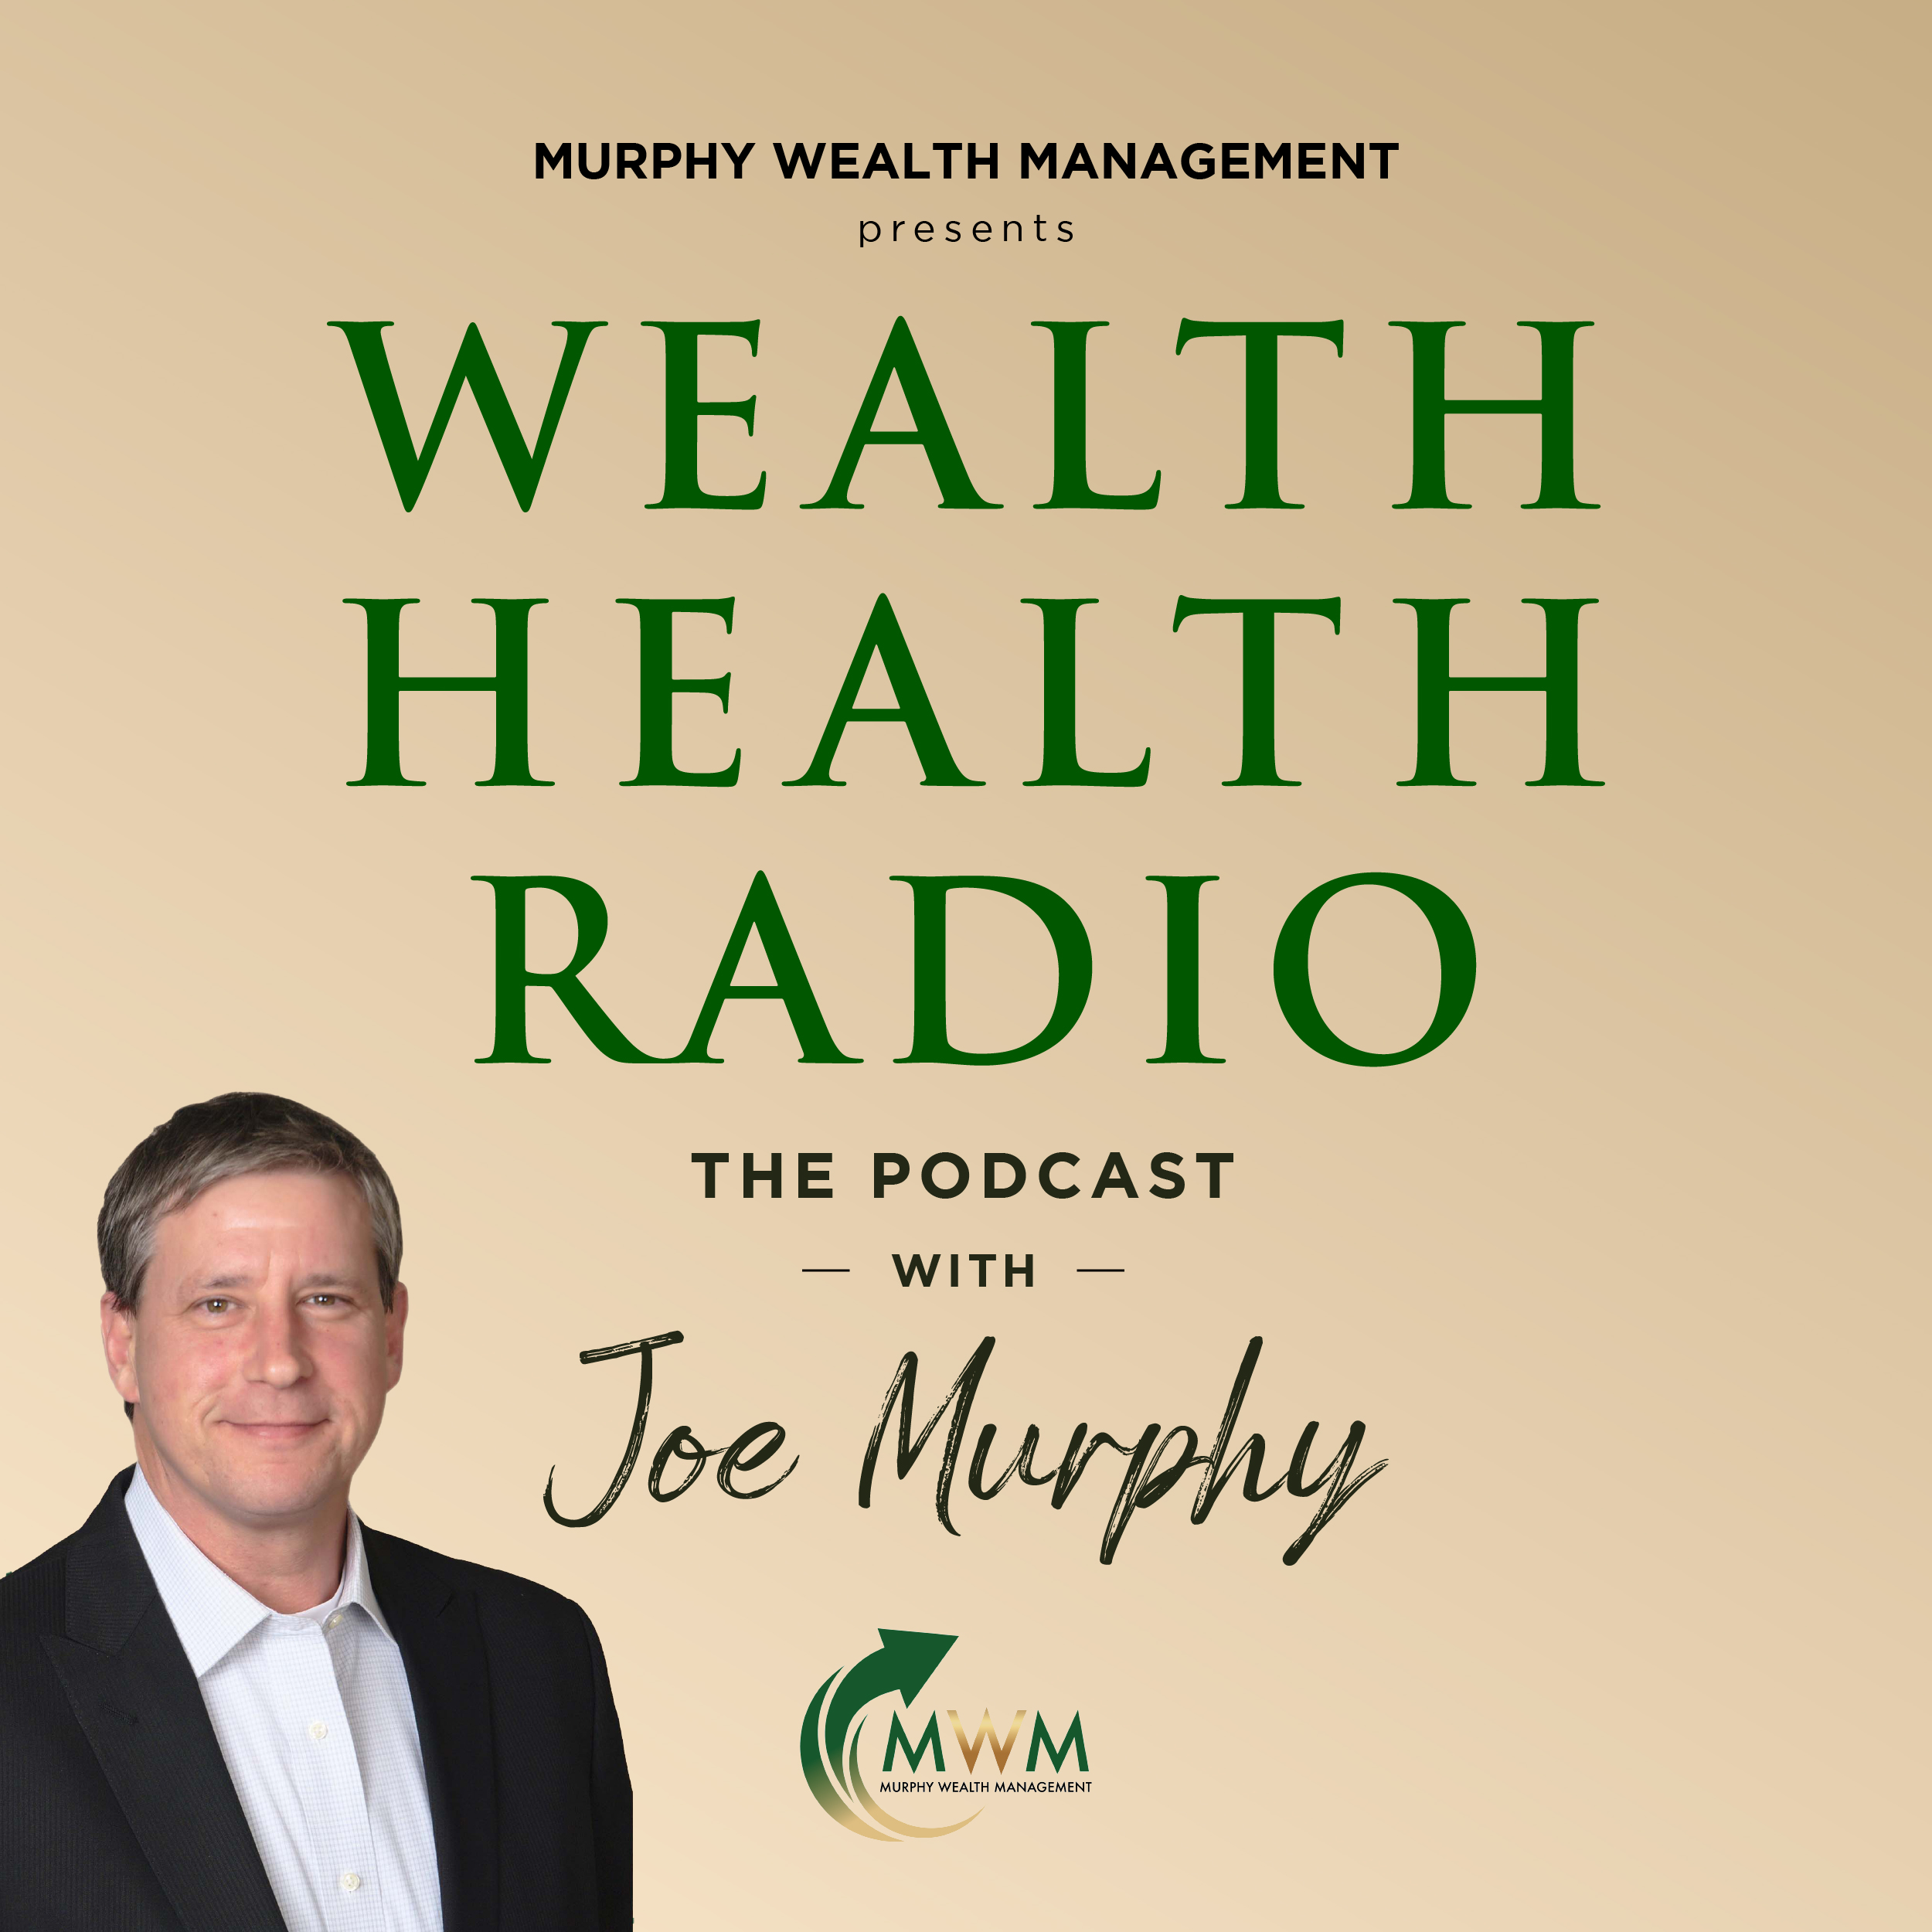 Wealth Health Radio  Joe Murphy is going to help ease your concerns and have a little fun by playing Financial Jeopardy, bringing you facts and tips along the way.